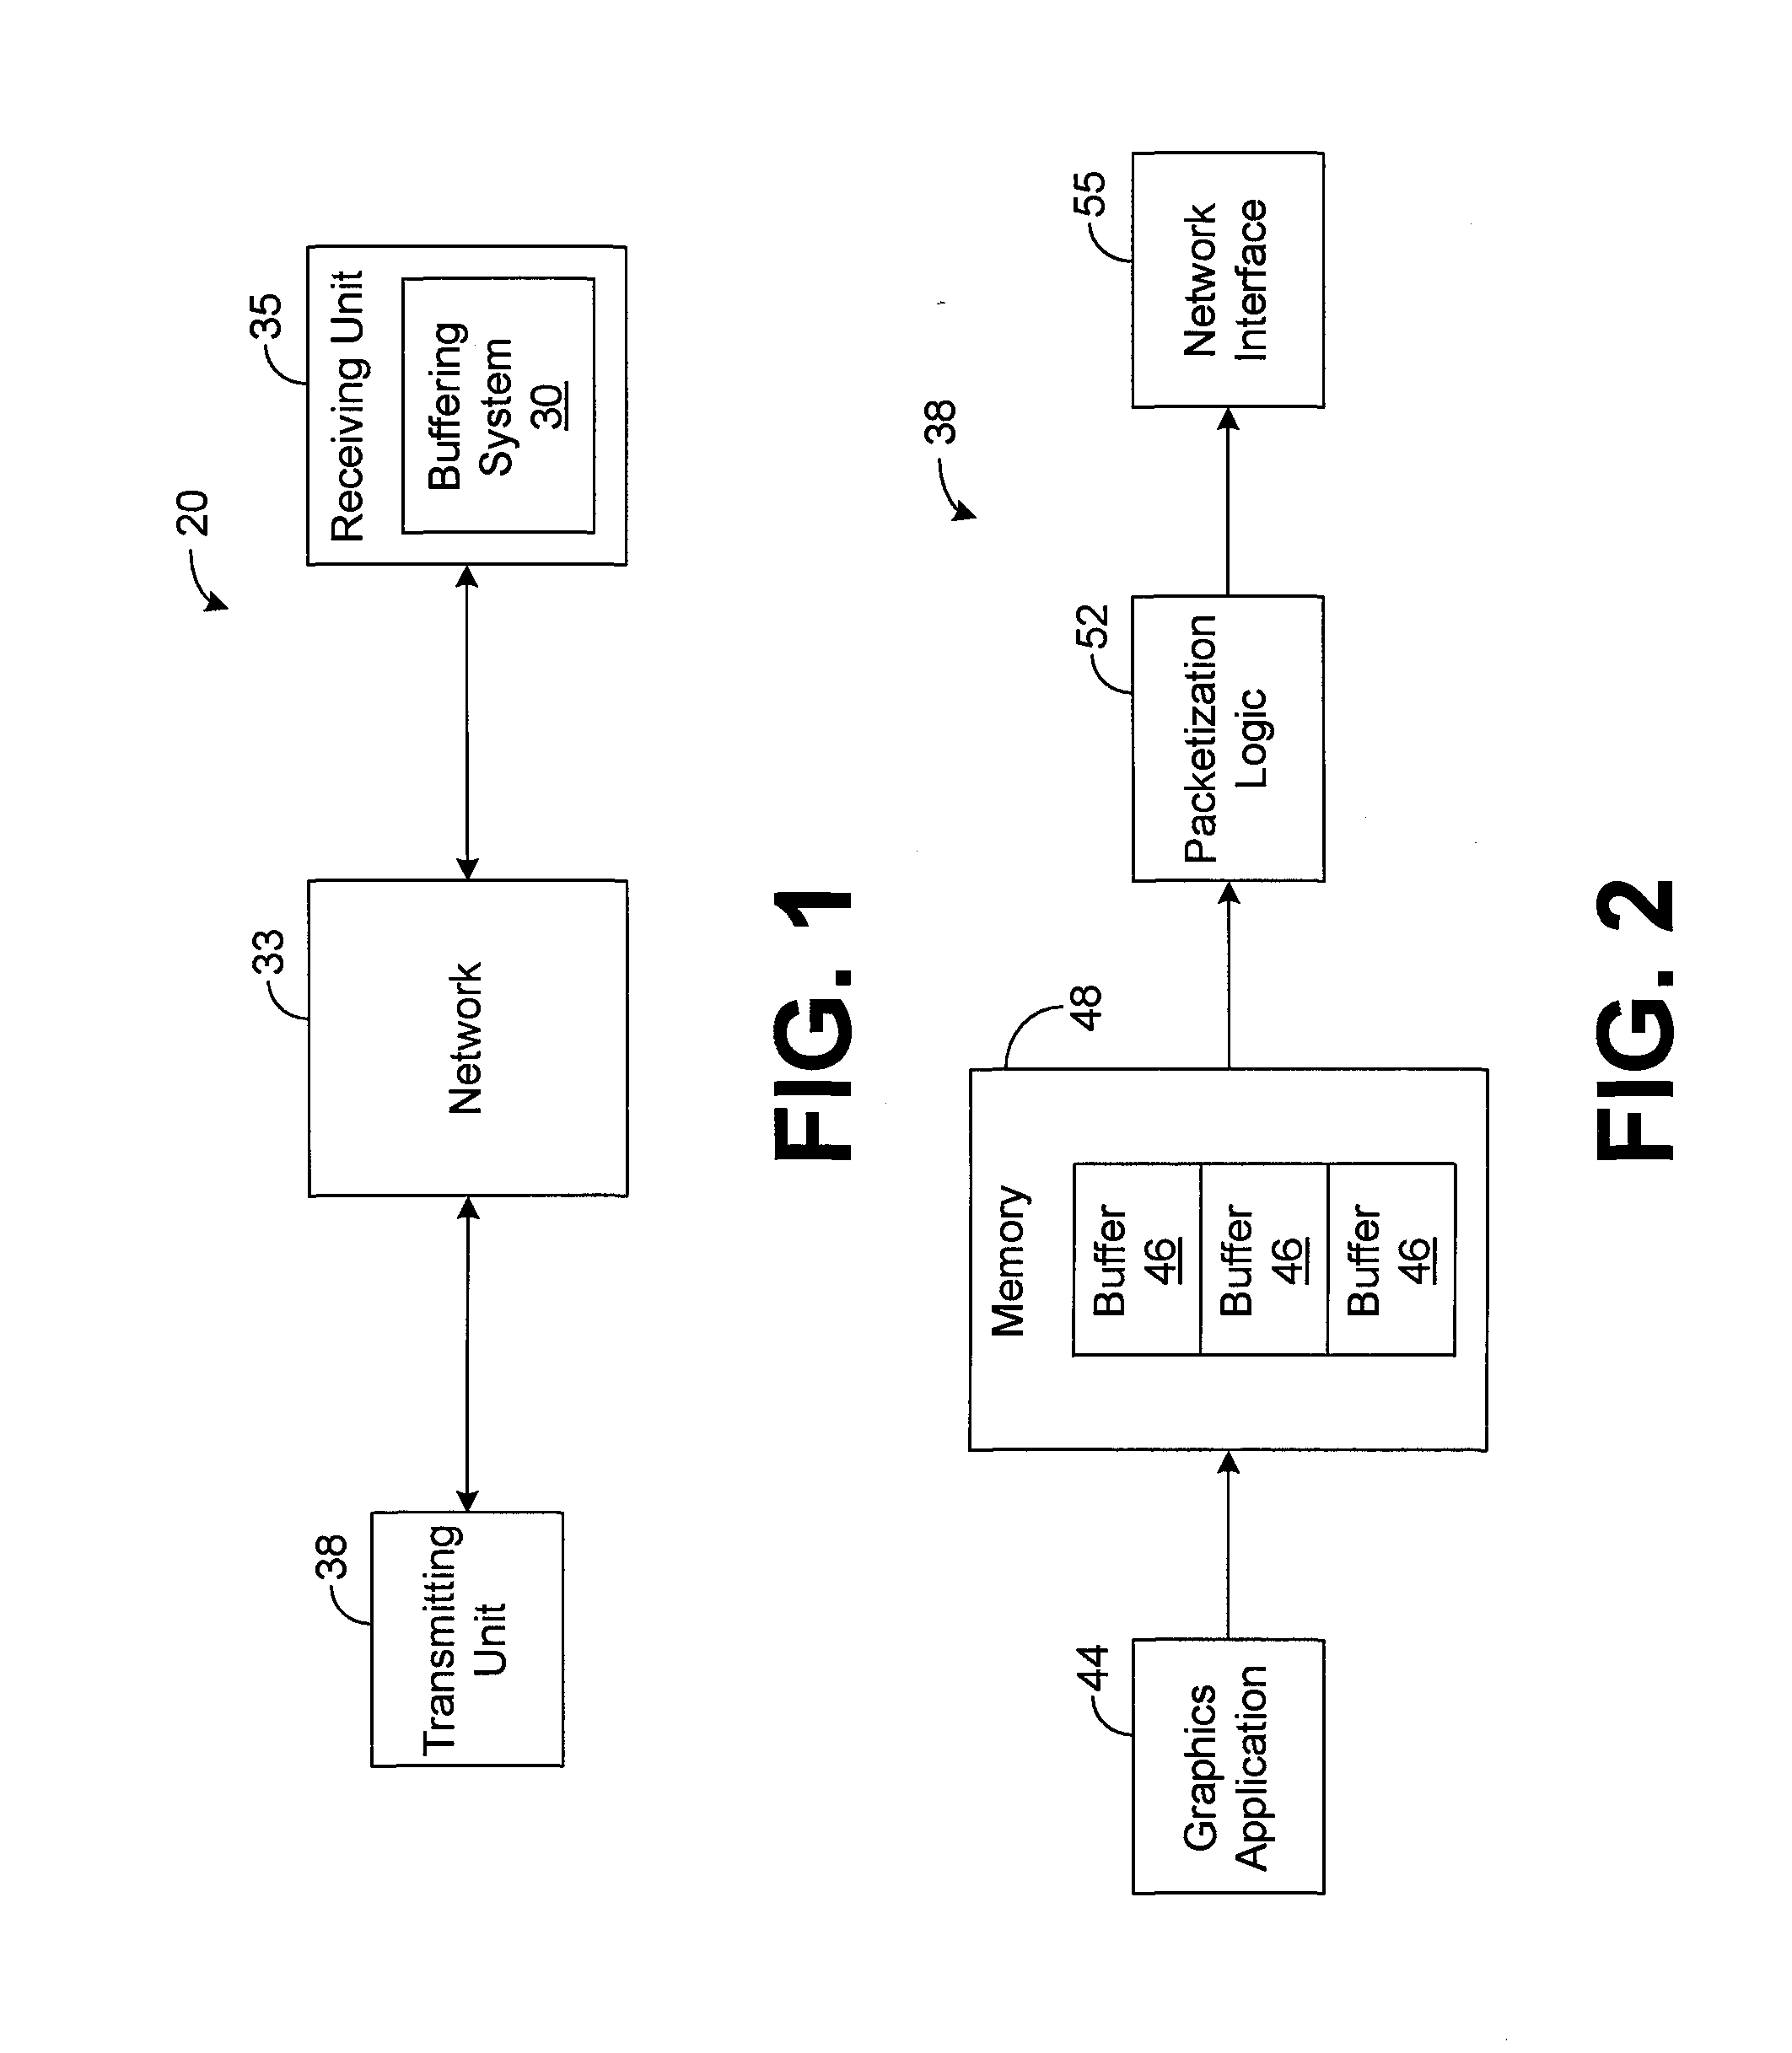 System and method for buffering data received from a network